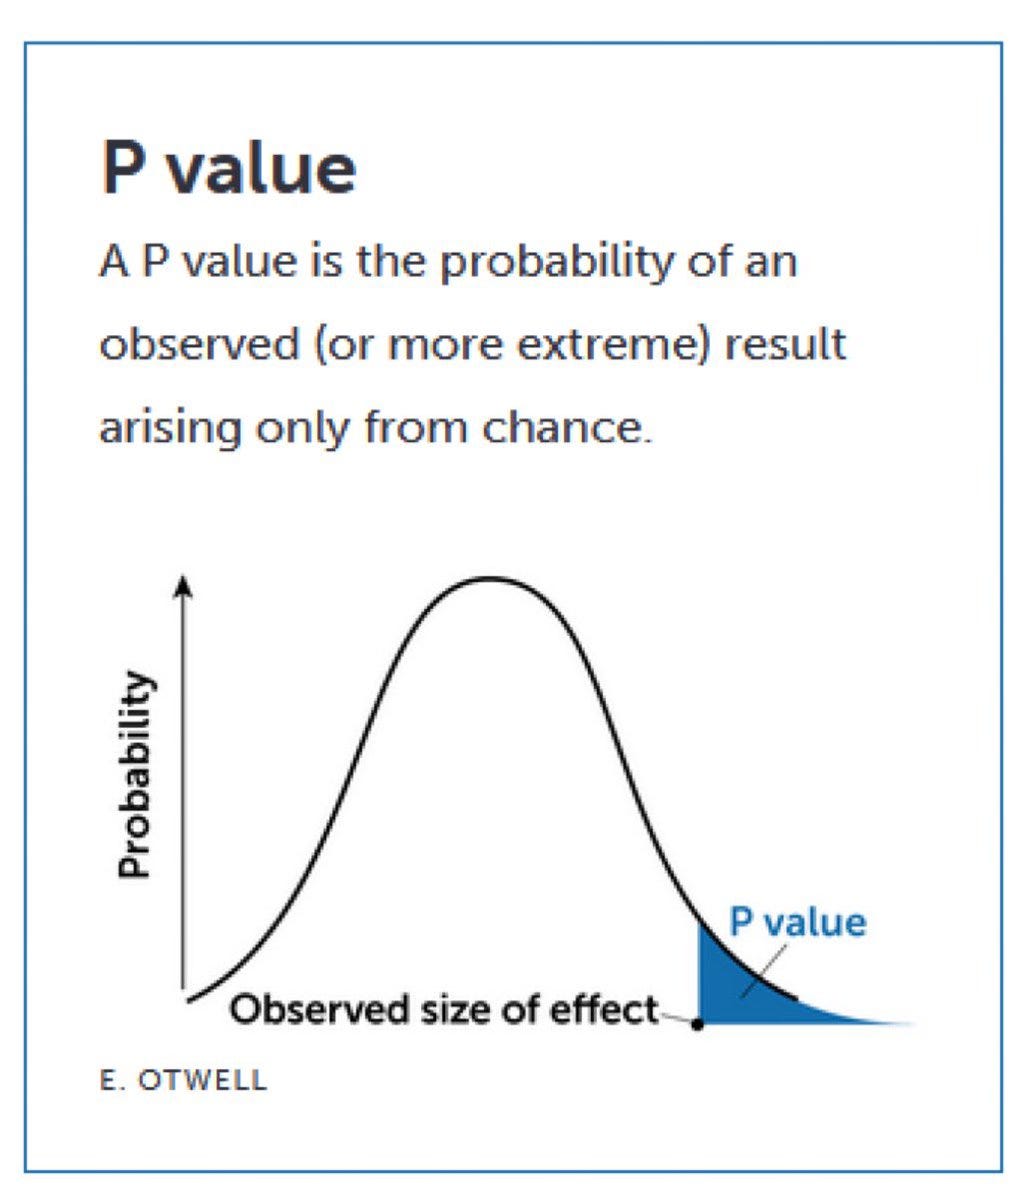 An explanation of p-value in our data set, and also how it helps explain the linear relationship being better.